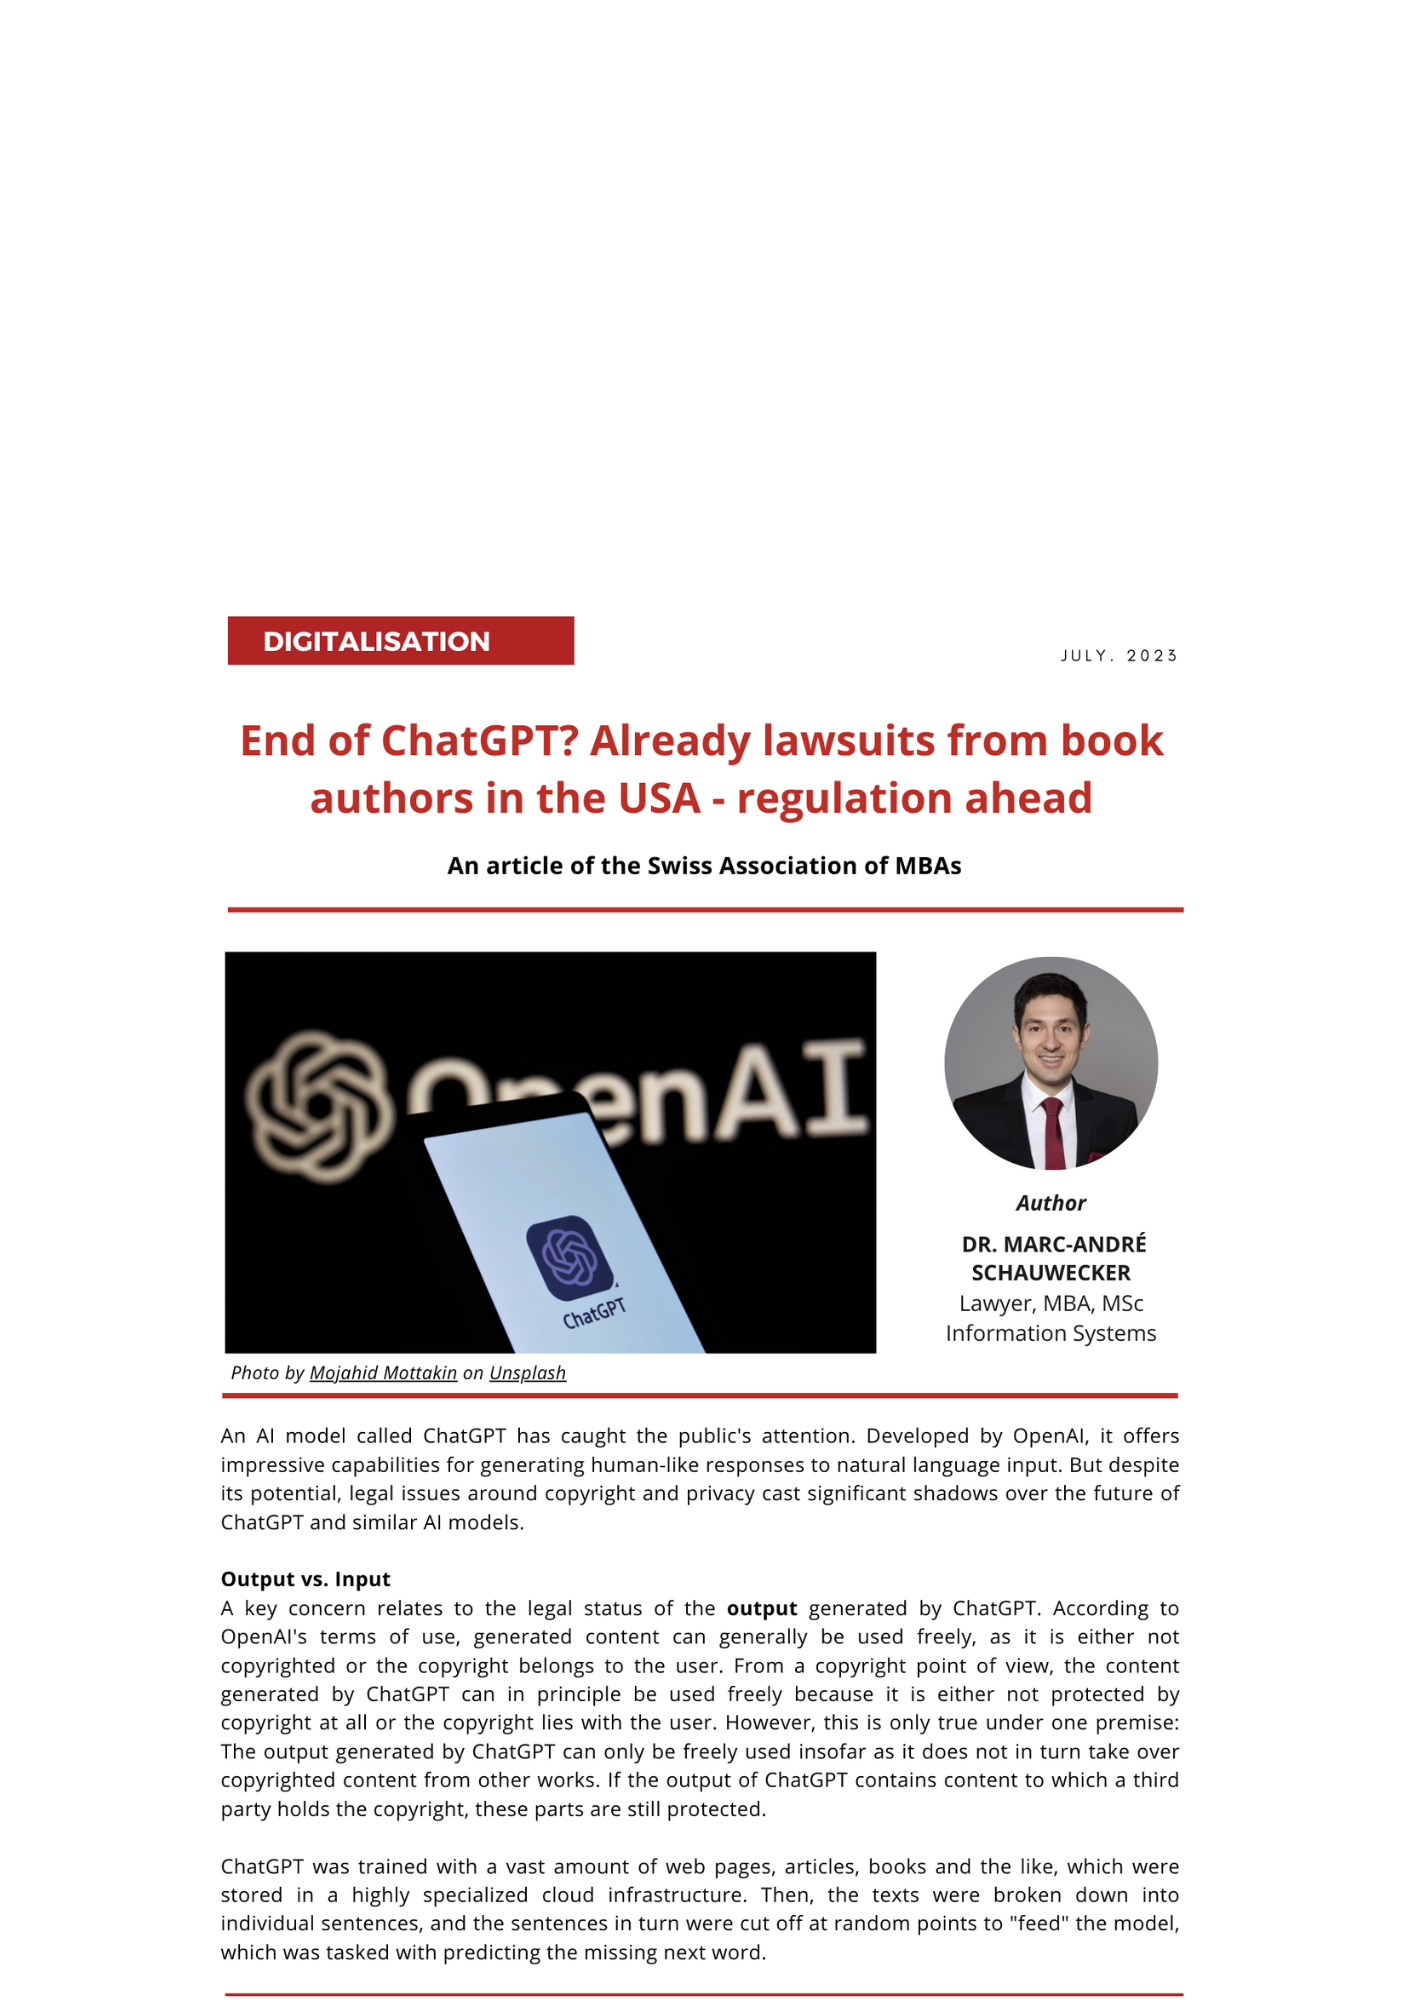 End of ChatGPT? Already lawsuits from book authors in the USA - regulation ahead